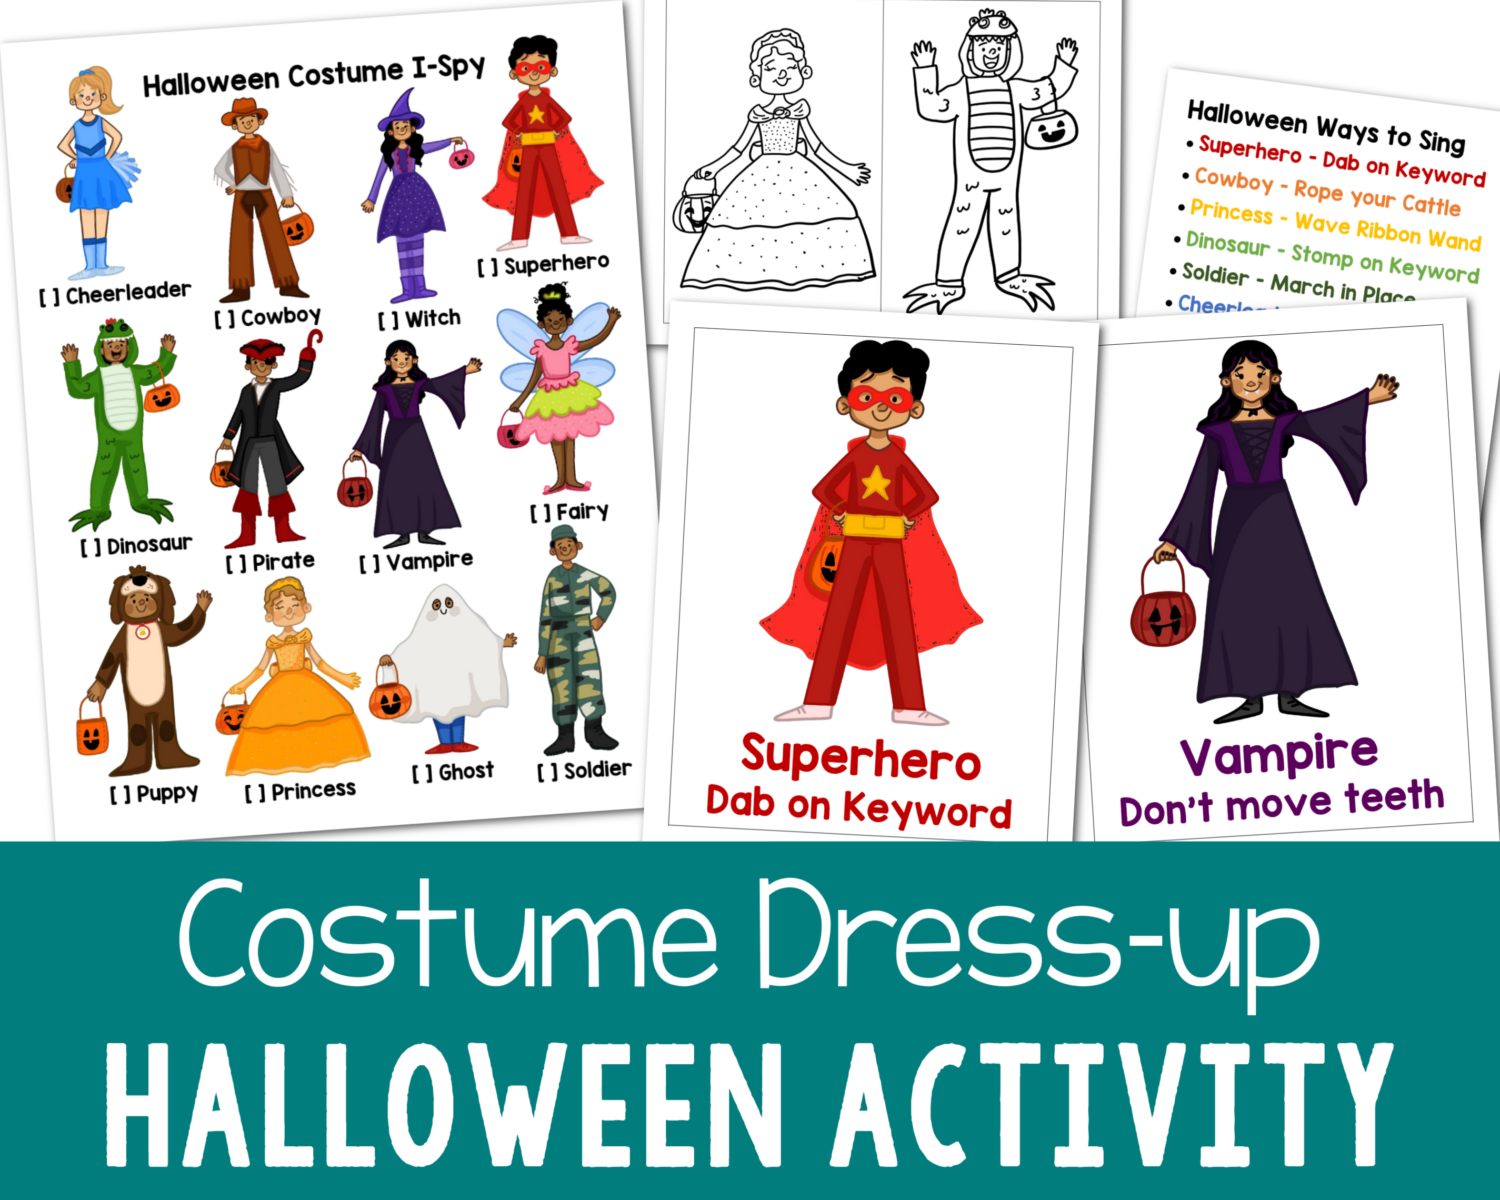 Shop Costume Dress-up Halloween Singing Time fun fall activity for kids and families classrooms Trick or Treating